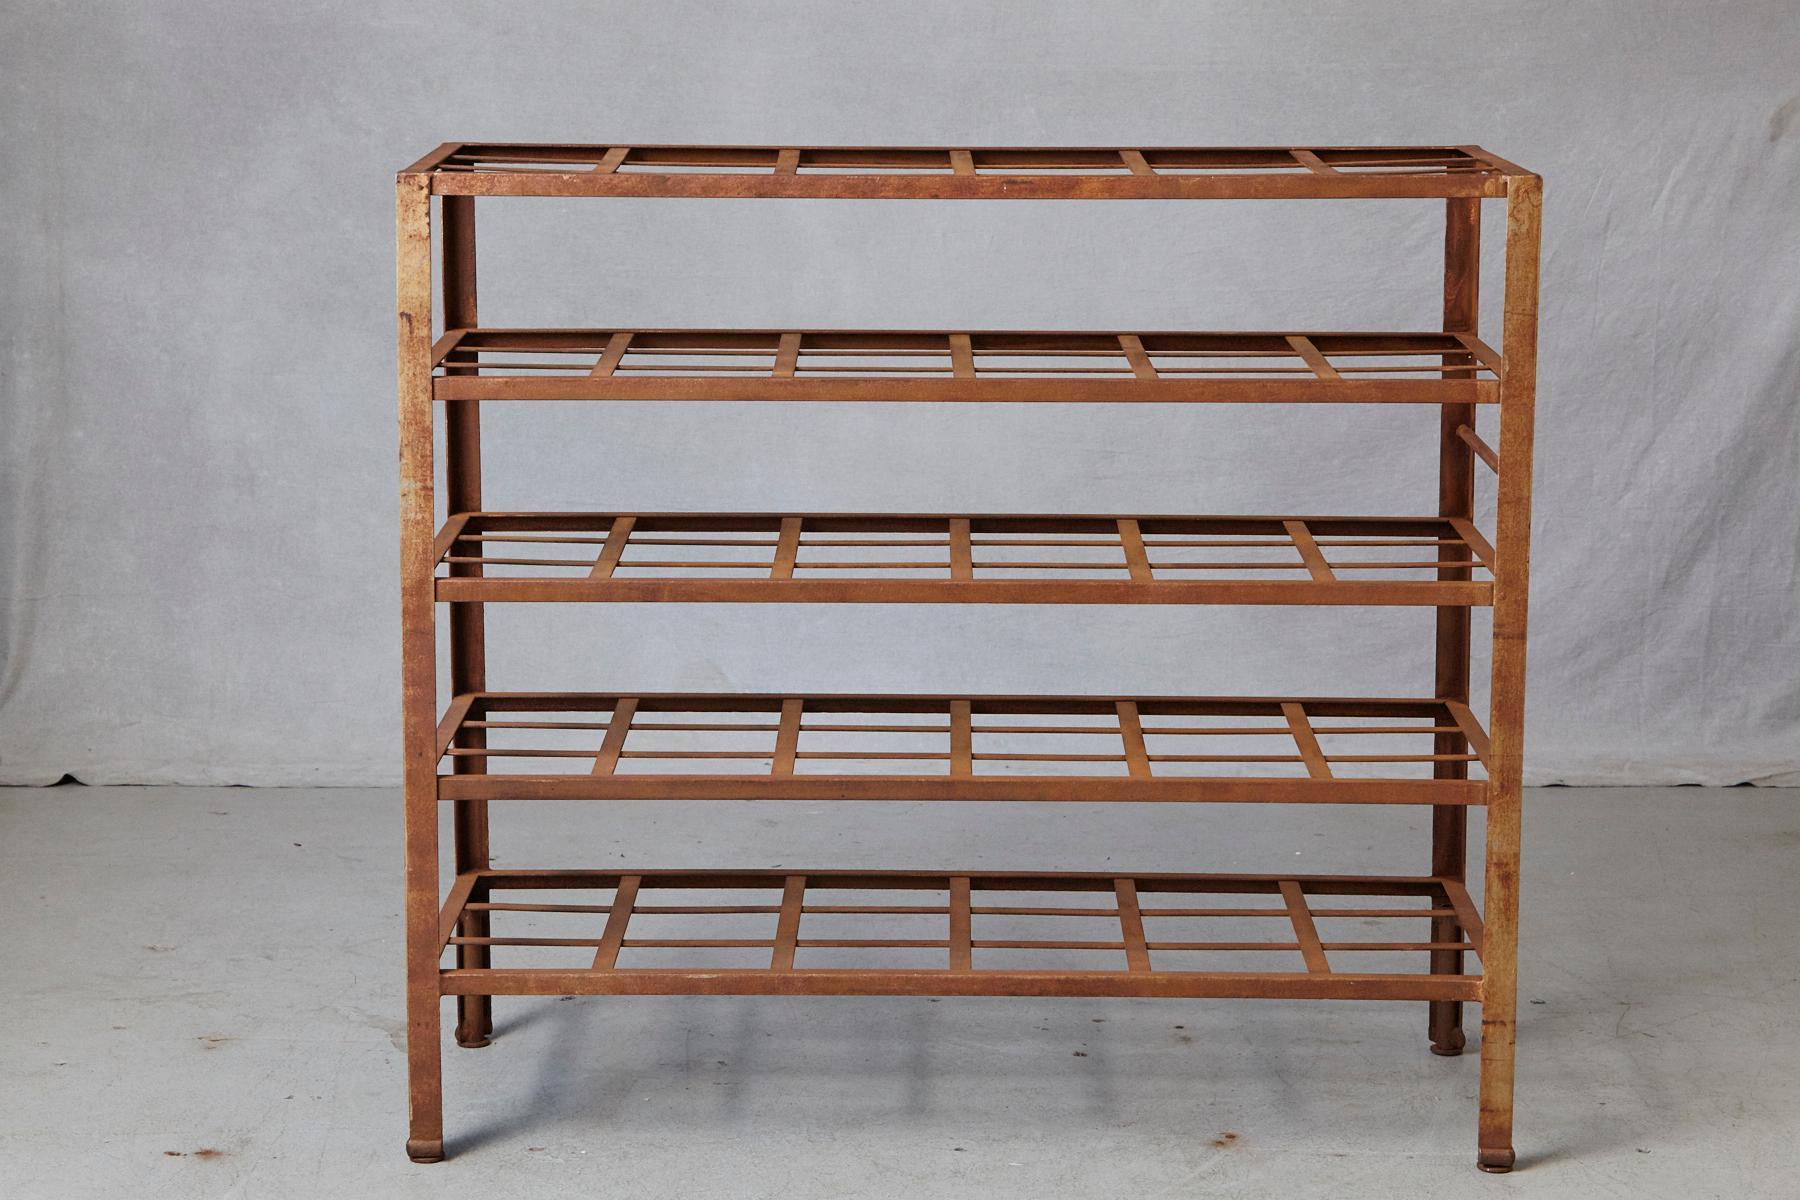 Stunning and rare, heavy and solid industrial 5 tier multi shelf with fixed grid shelves, nicely weathered, circa 1960s.
Great for usage as book shelf for large coffee table books or as planting shelf for seedlings.